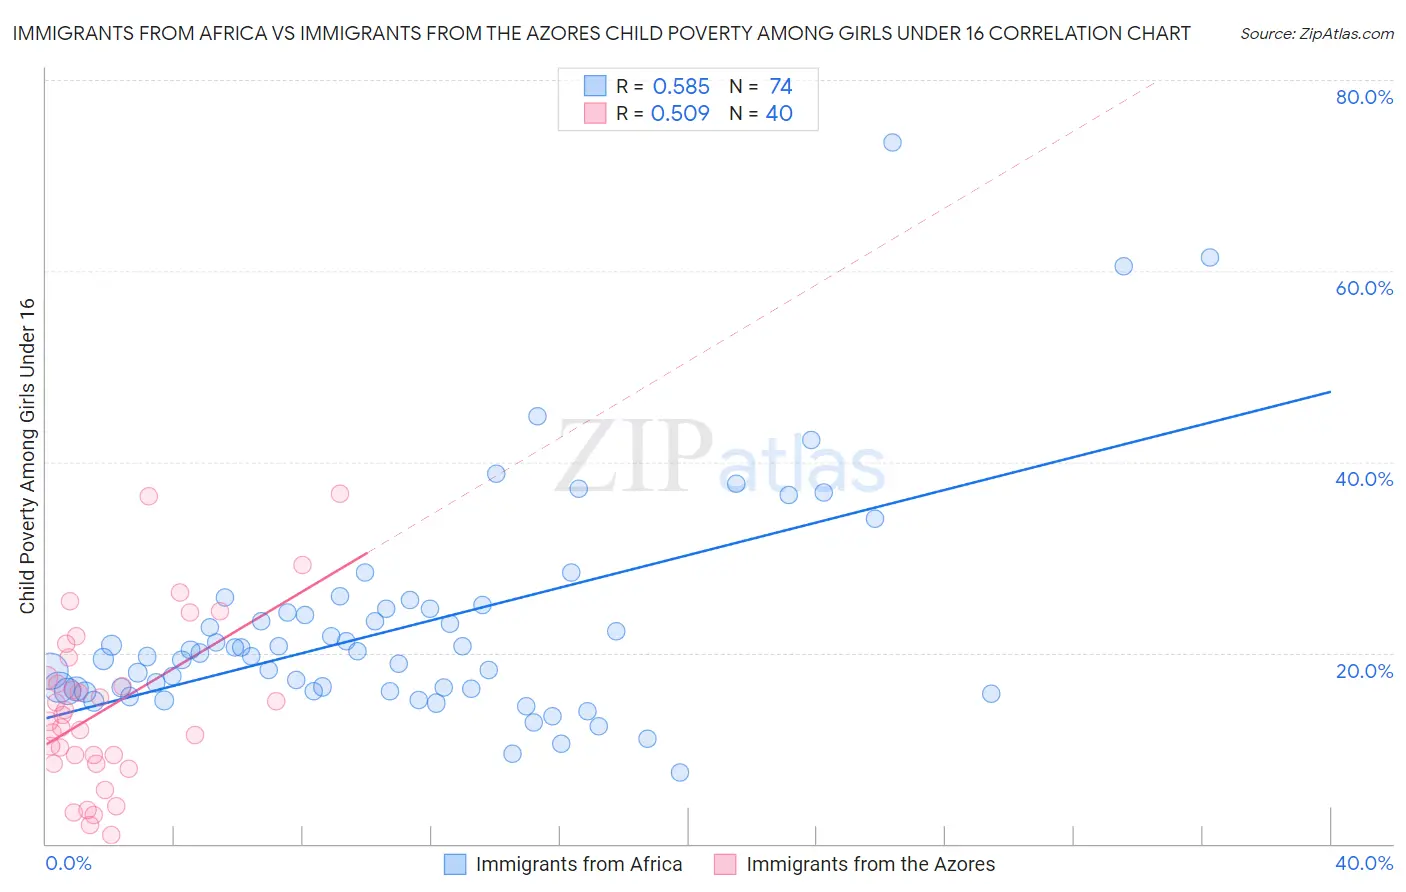 Immigrants from Africa vs Immigrants from the Azores Child Poverty Among Girls Under 16